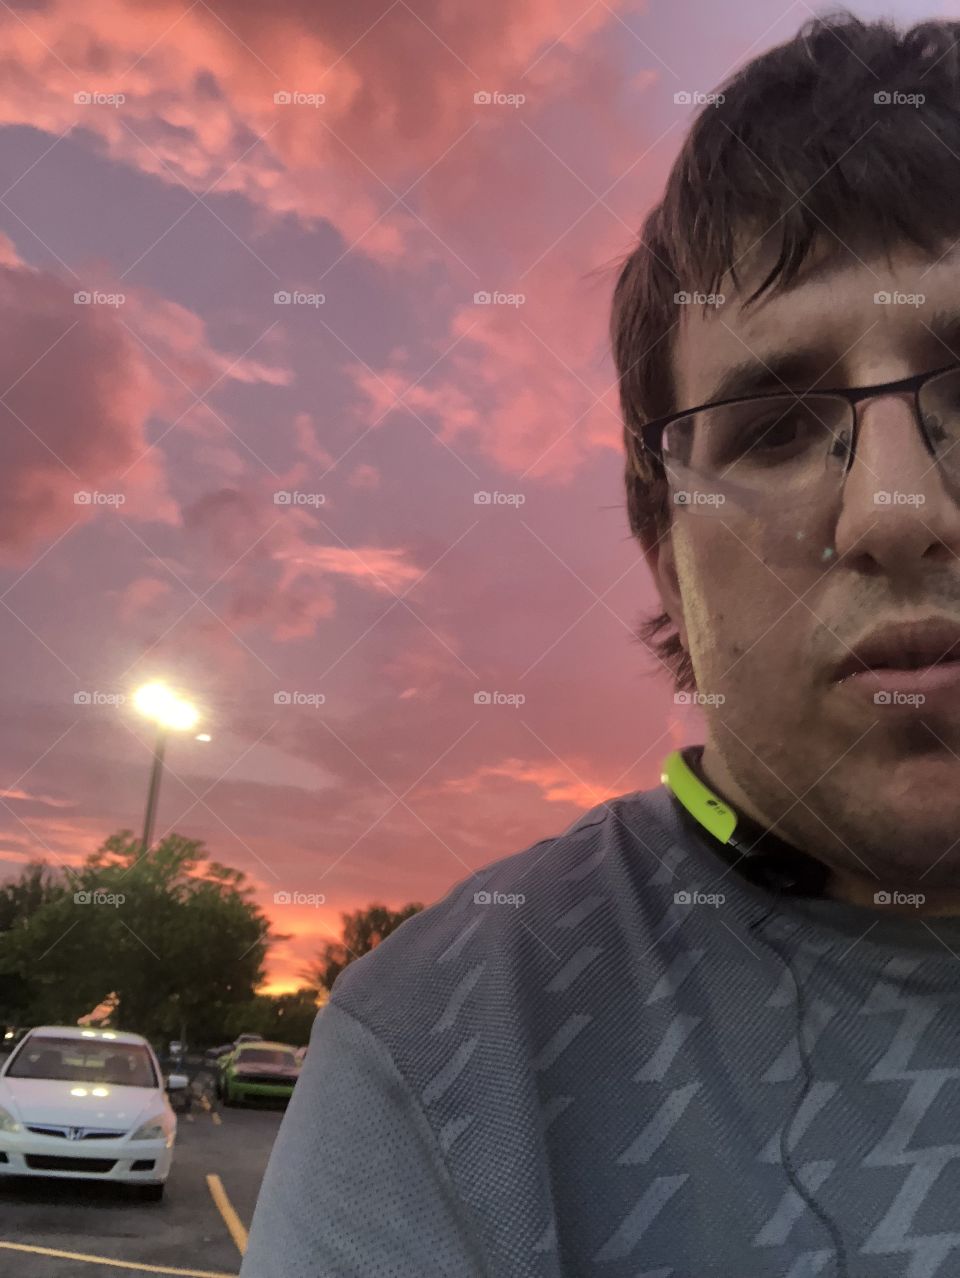 A really nice selfie sunset on a beautiful afternoon